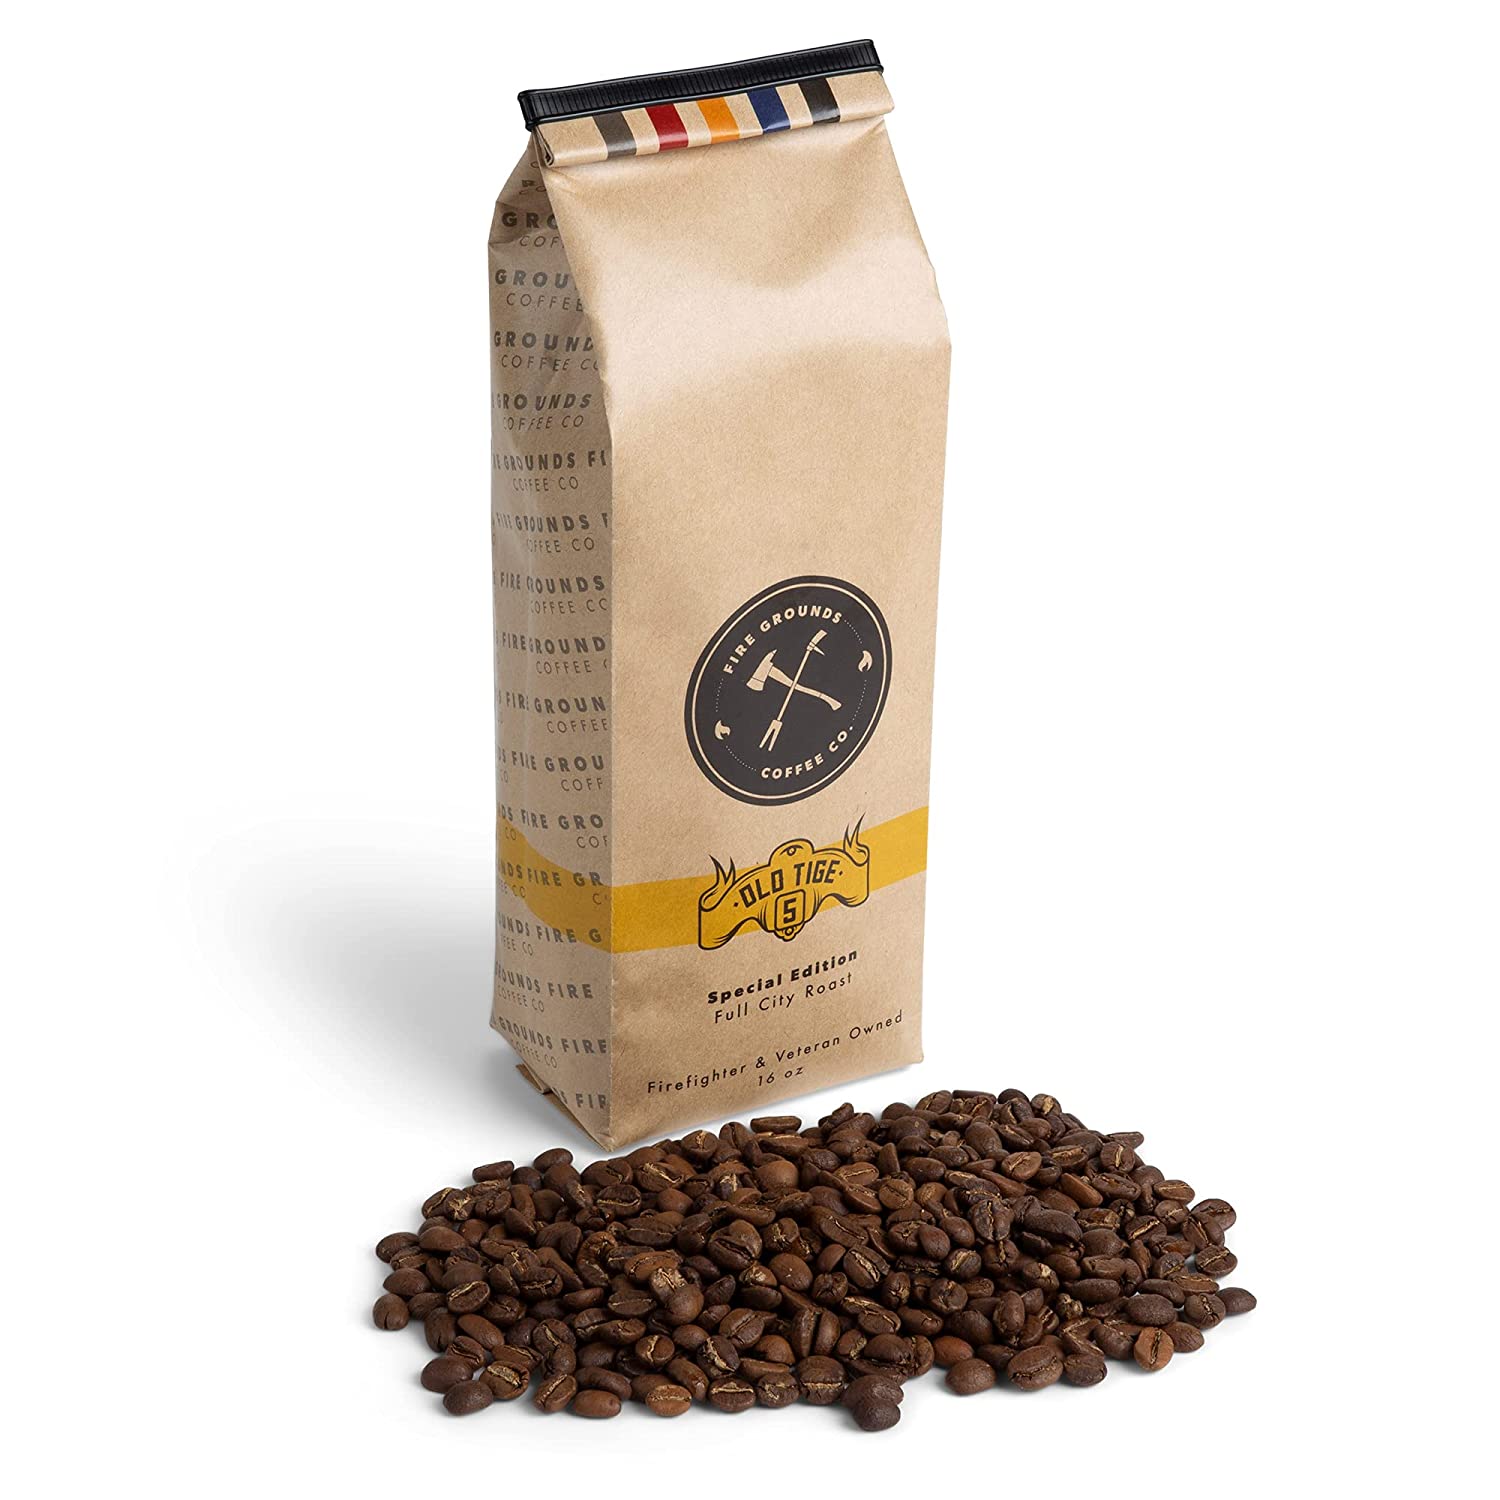 Old Tige 5 (Full City Roast) by fire grounds coffee company